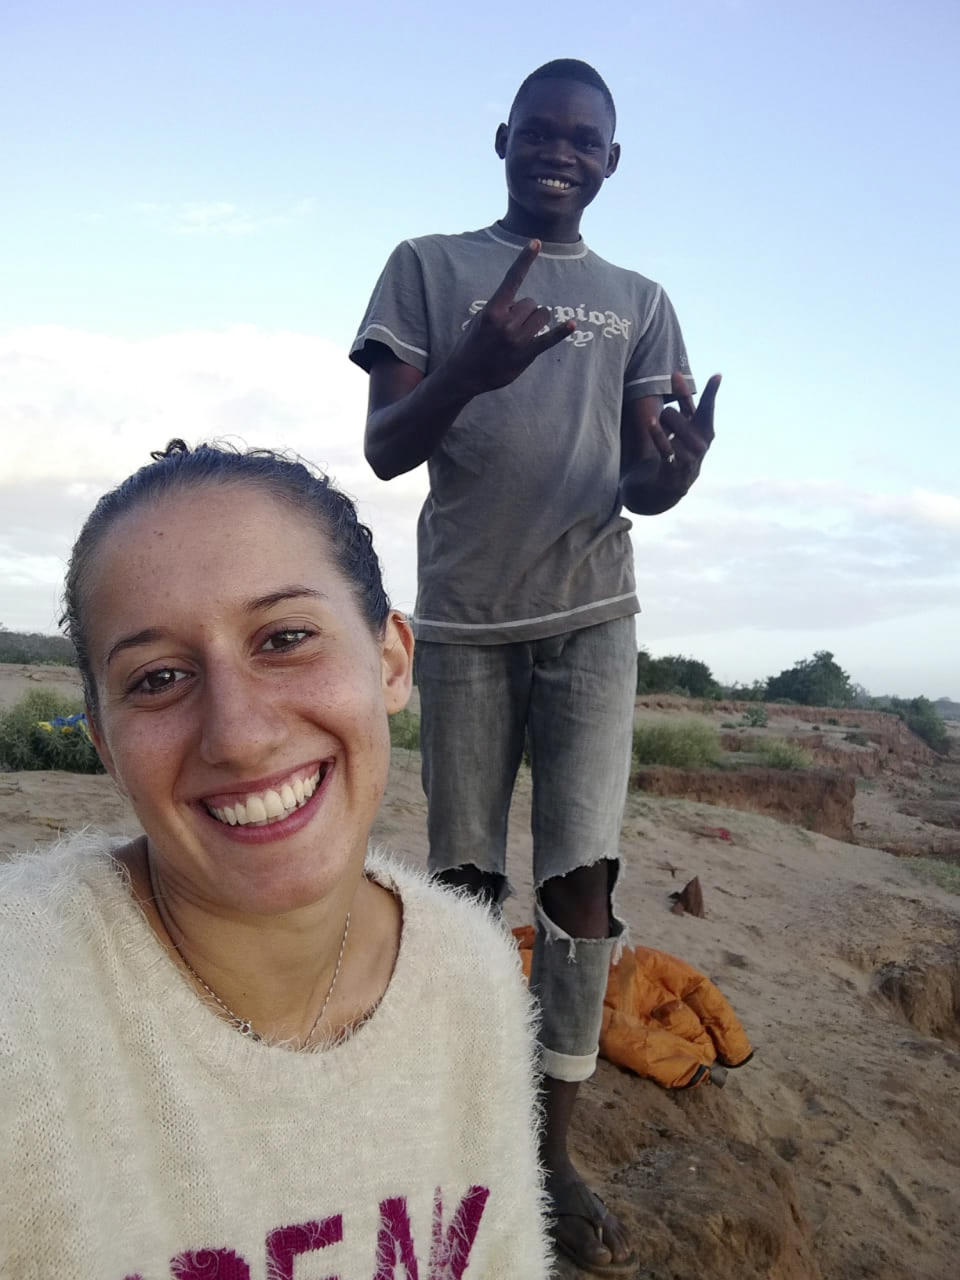 FILE - In this August 2018 file photo, Italian volunteer Silvia Costanza Romano, left, poses with local resident Ronald Kazungu Ngala, 19, in the village of Chakama, in coastal Kilifi county, Kenya. Italian Premier Giuseppe Conte has announced that an Italian aid worker kidnapped in late 2018 while she was working in Kenya has been freed. Conte tweeted Saturday: “Silvia Romano has been freed. Thanks to the men and women of the foreign intelligence services. Silvia, we’re waiting for you in Italy!” (AP Photo, File)